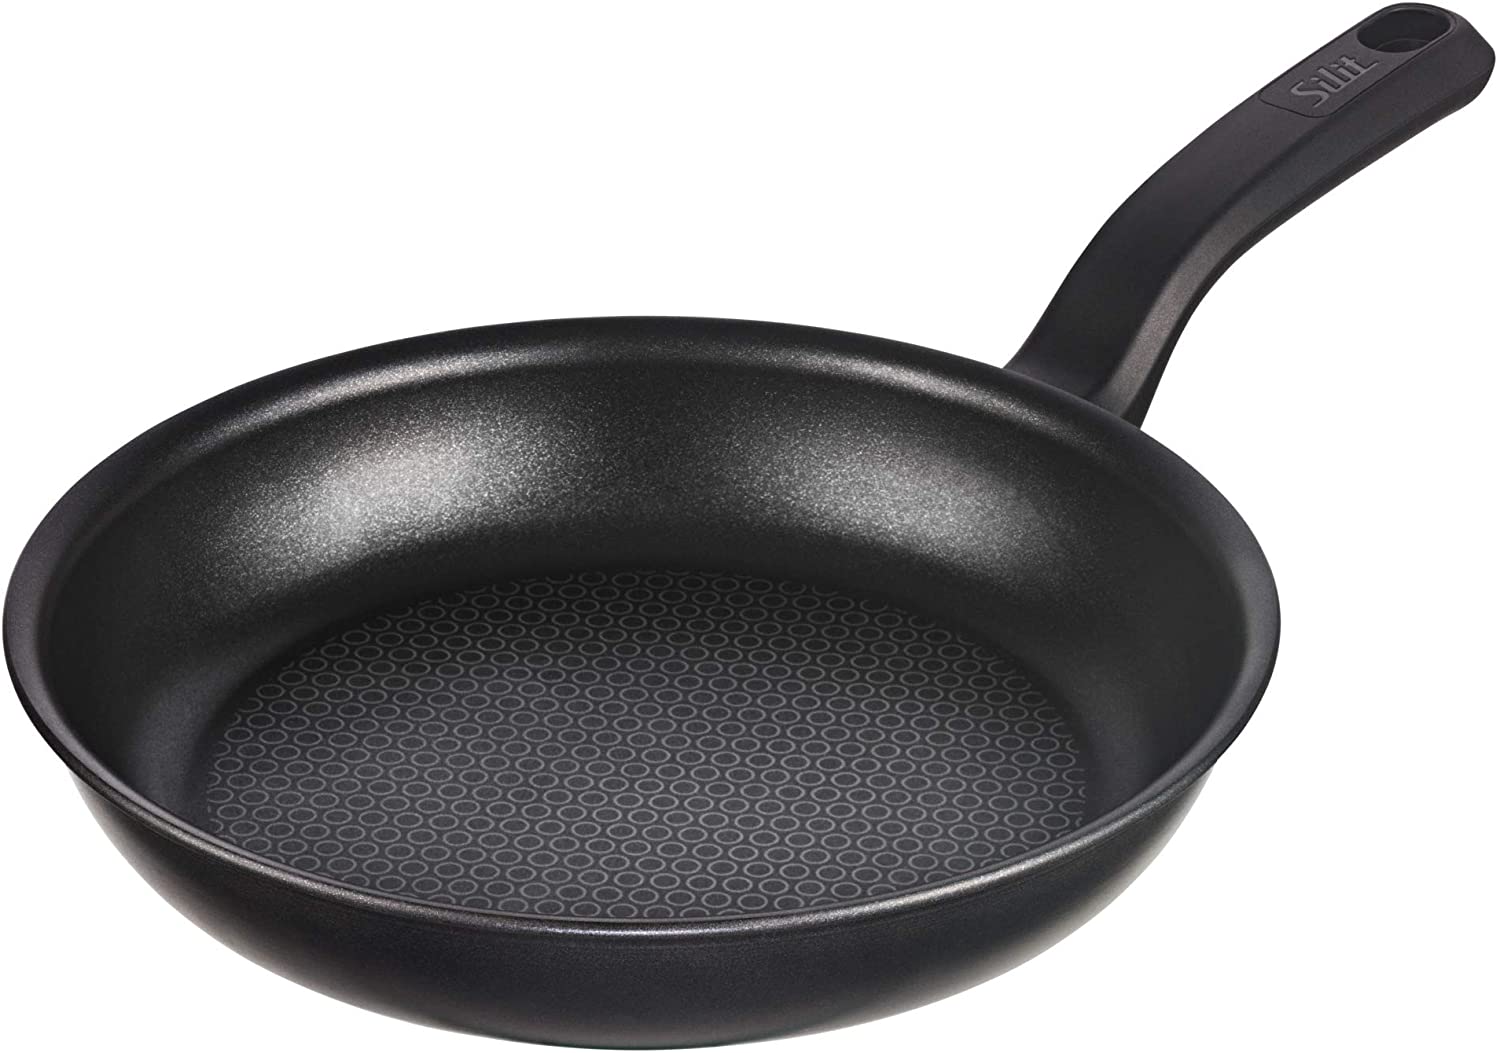 Silit Taiping Induction Frying Pan 24 cm Aluminium Coated with Plastic Handle for Gentle Frying